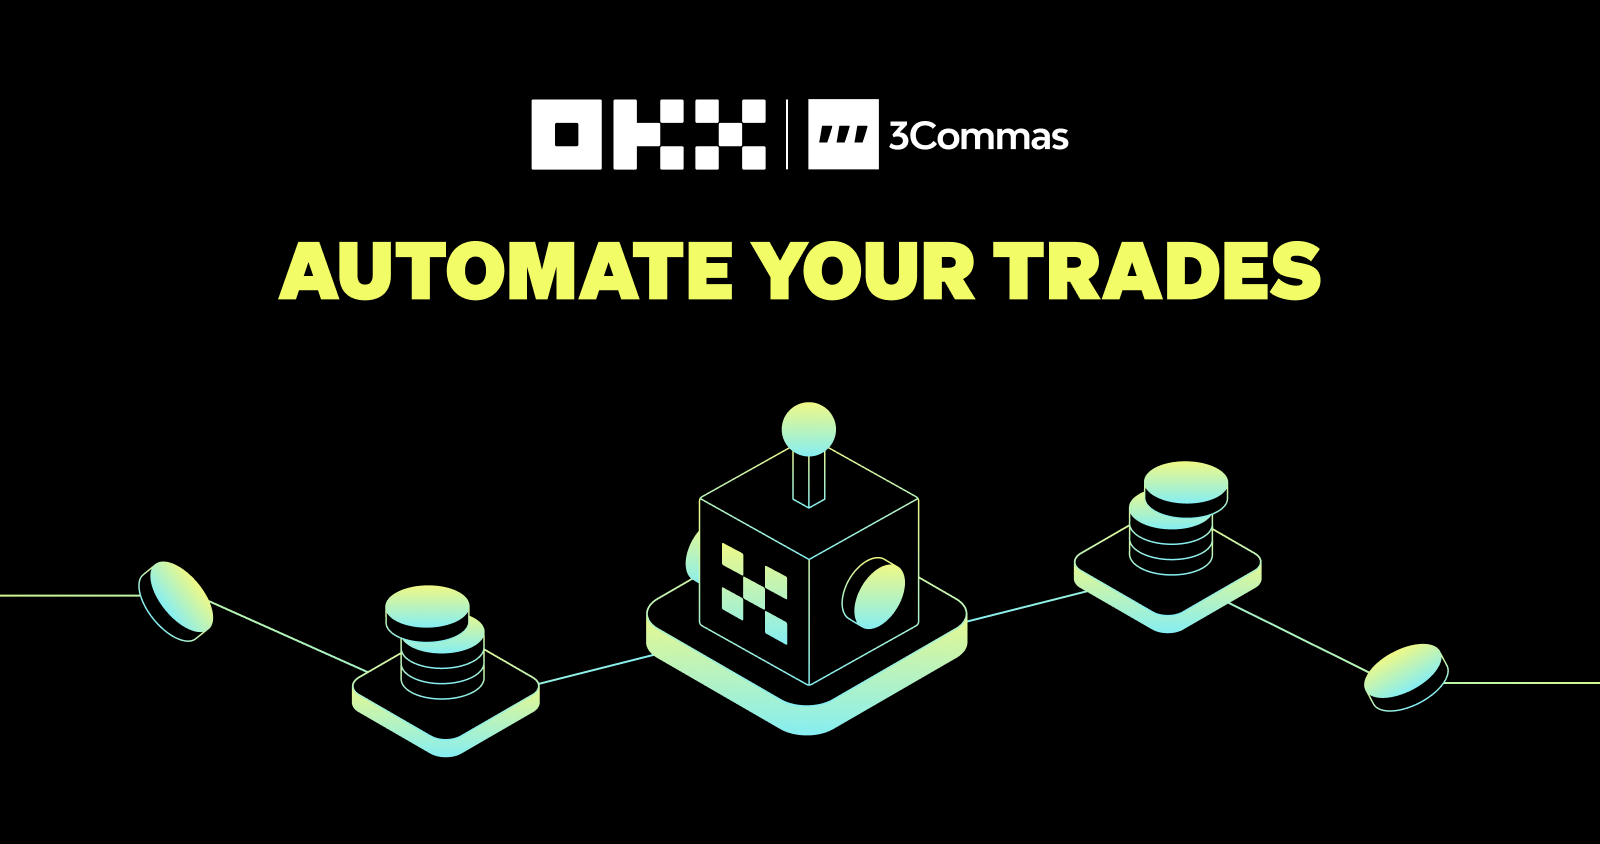 Automate your trades with 3Commas